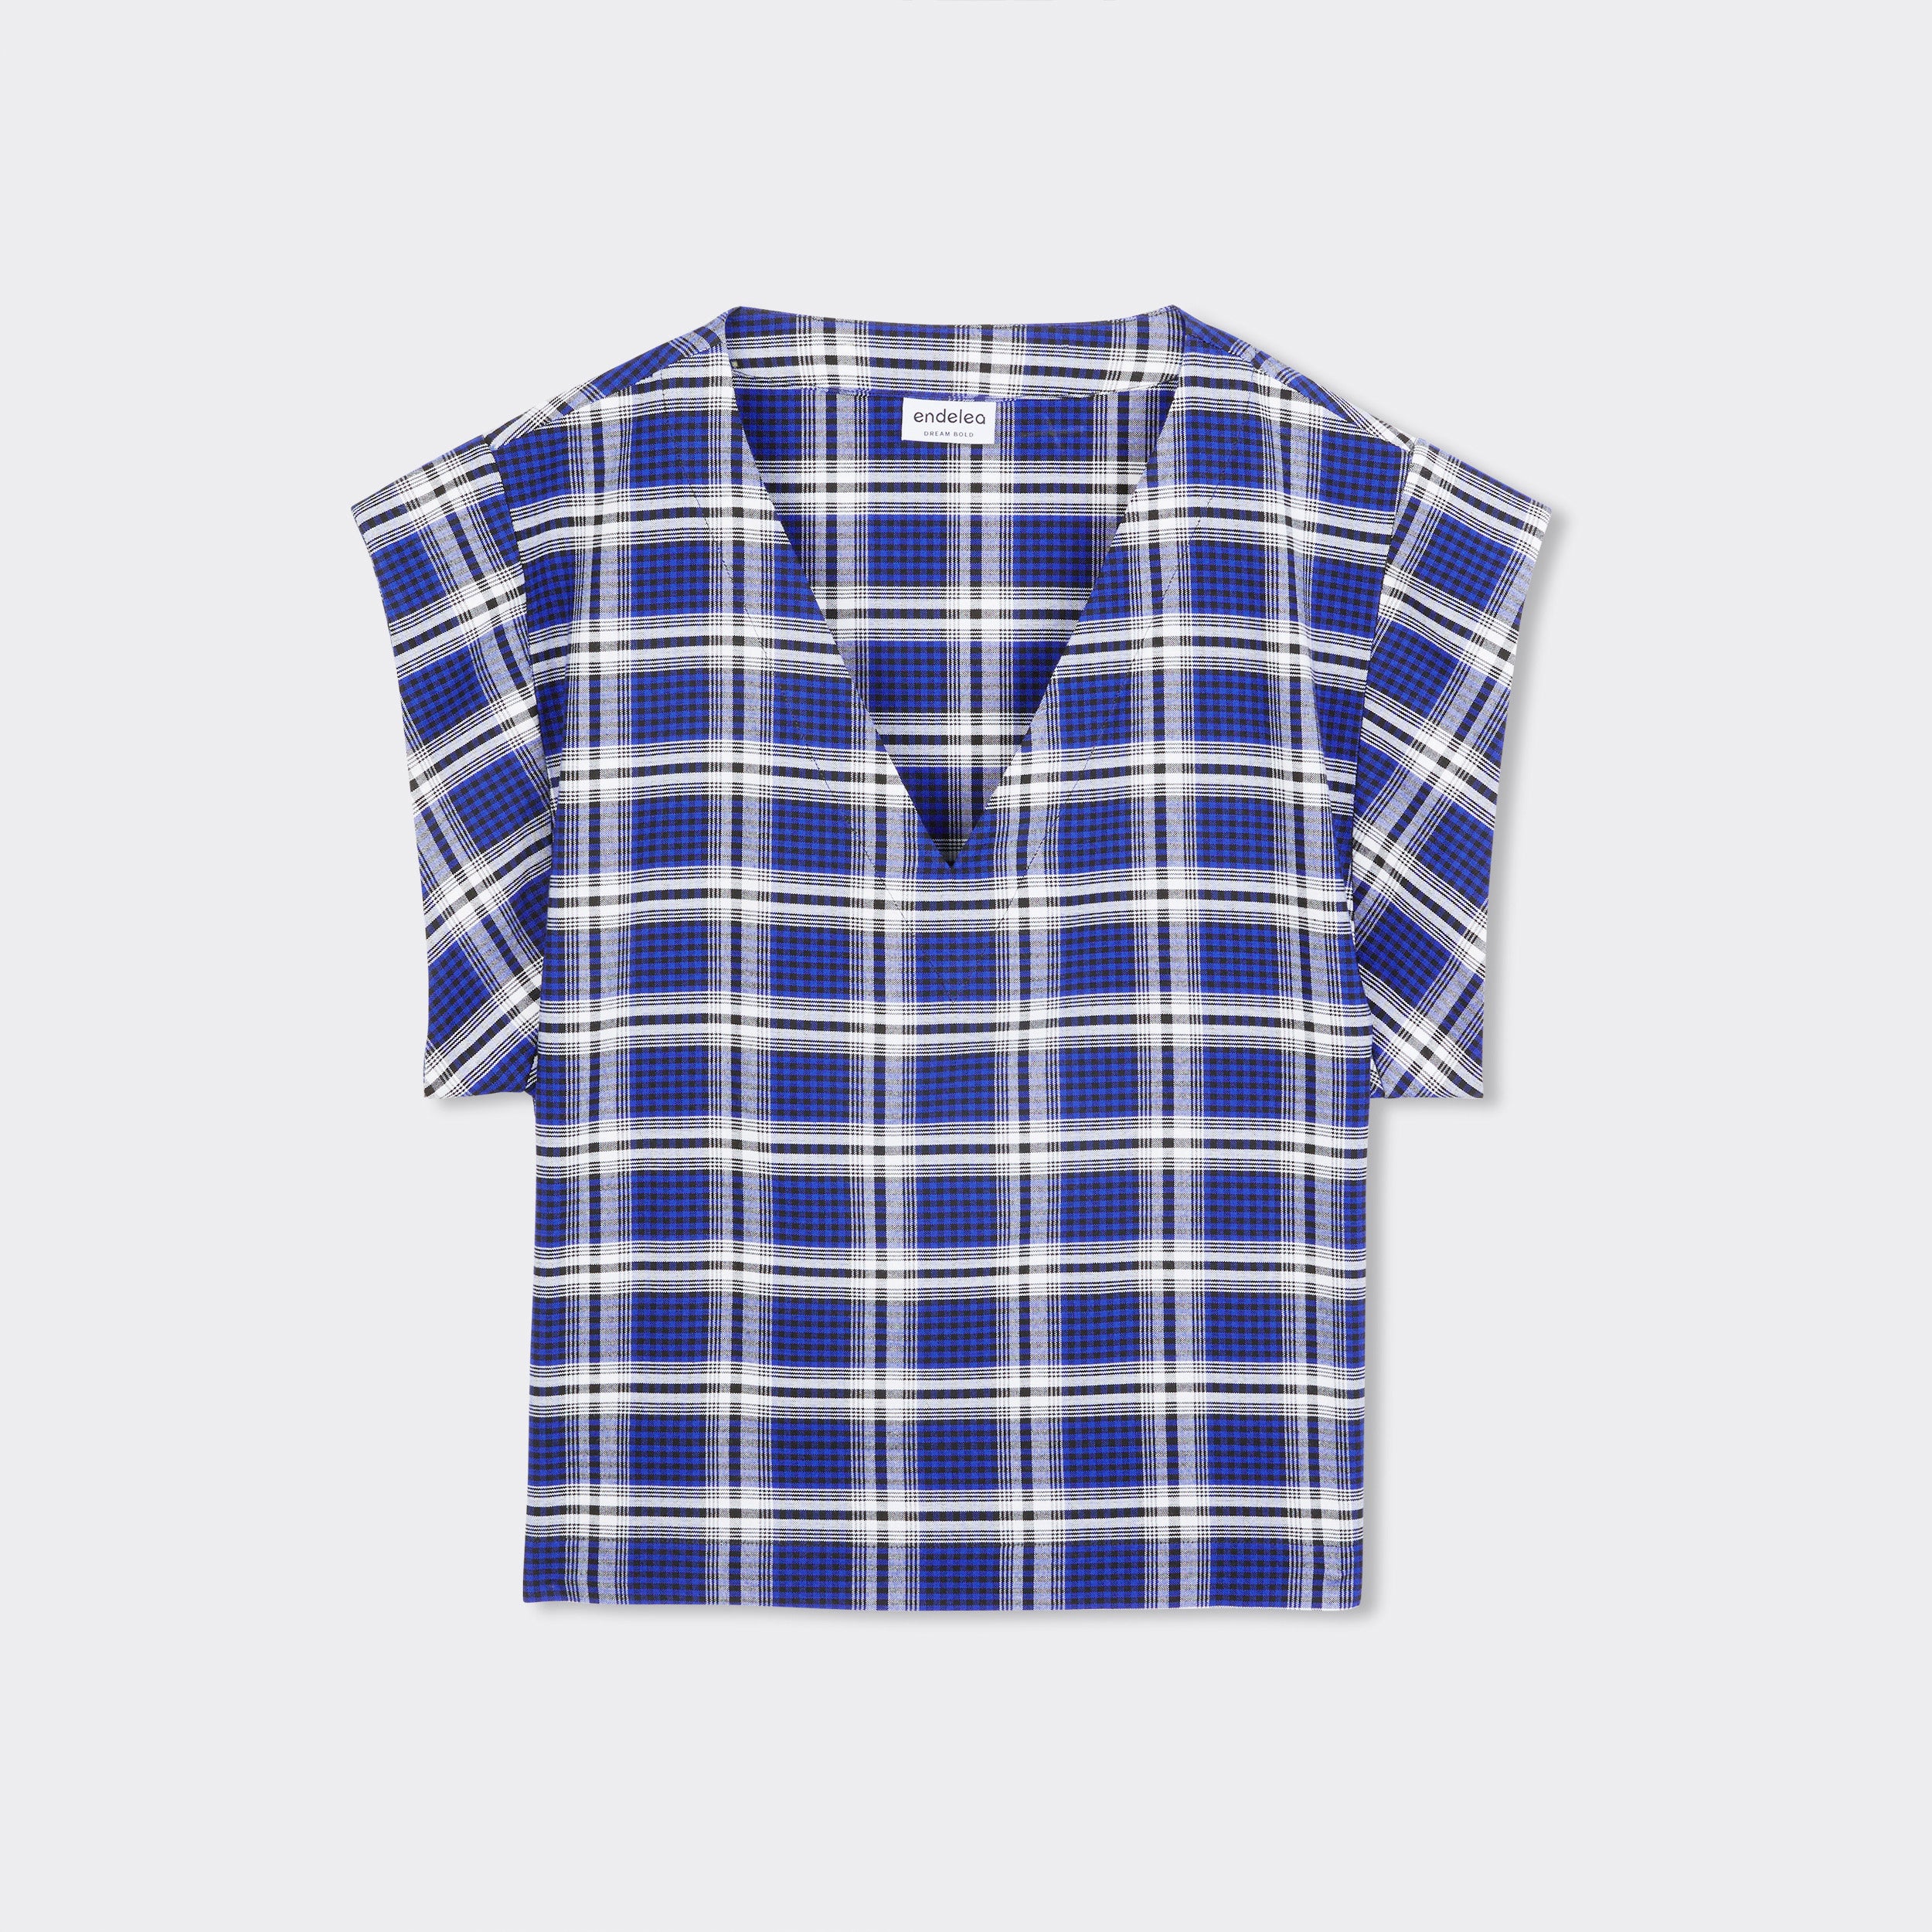 Still life:  V-Neck top with short sleeves. The print is Maasai Check in blue and white.